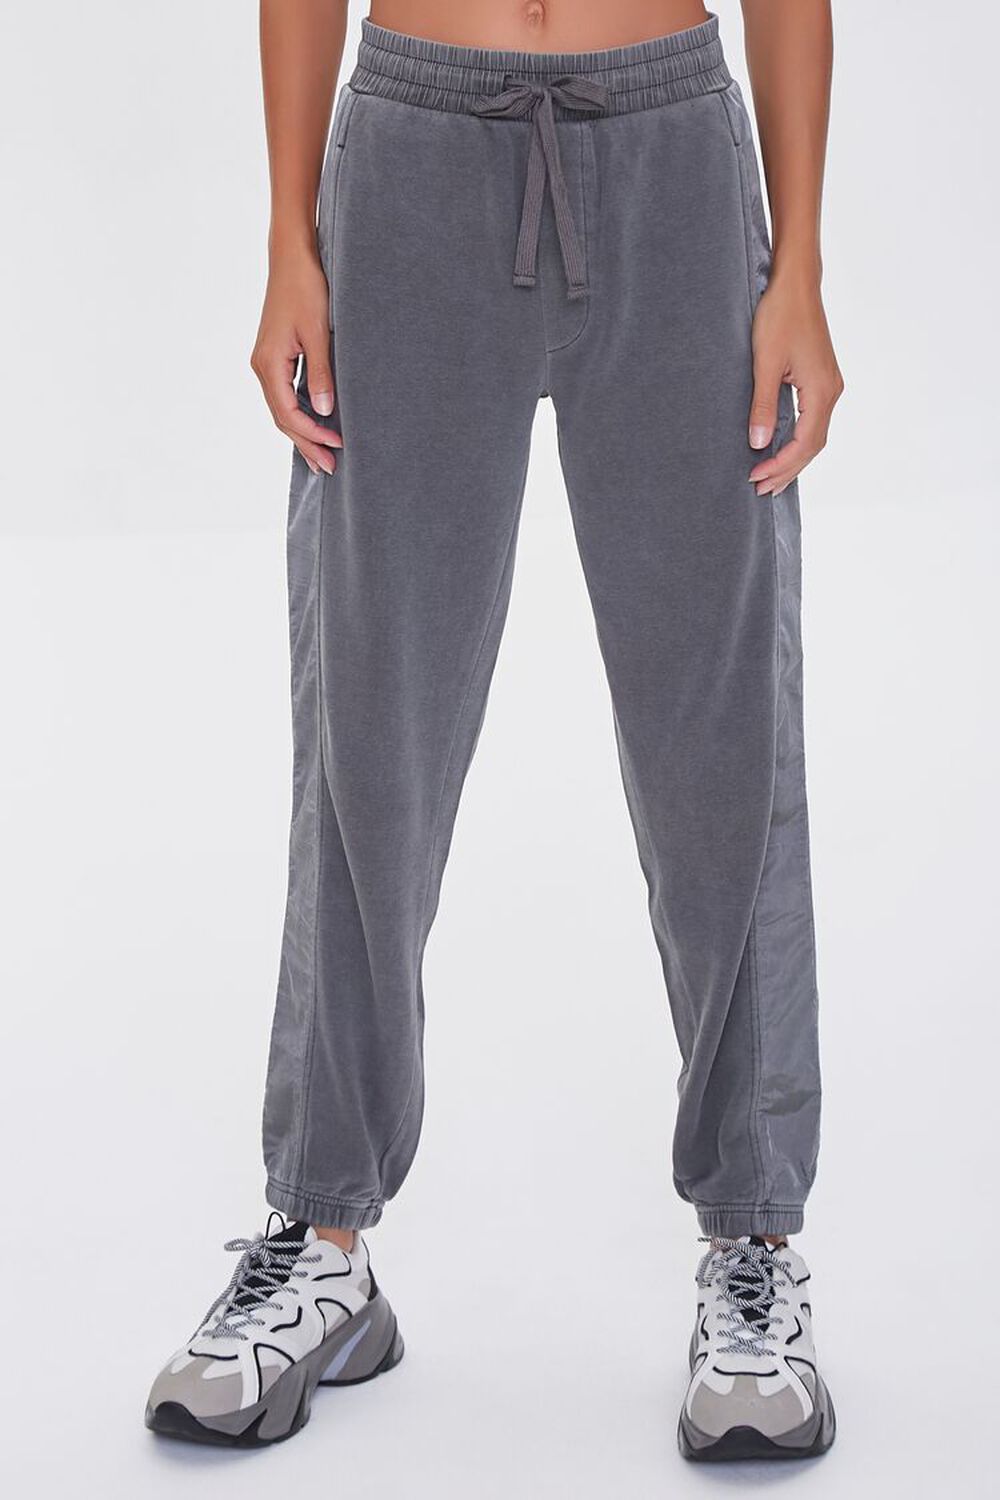 CHARCOAL Side-Striped Joggers, image 2